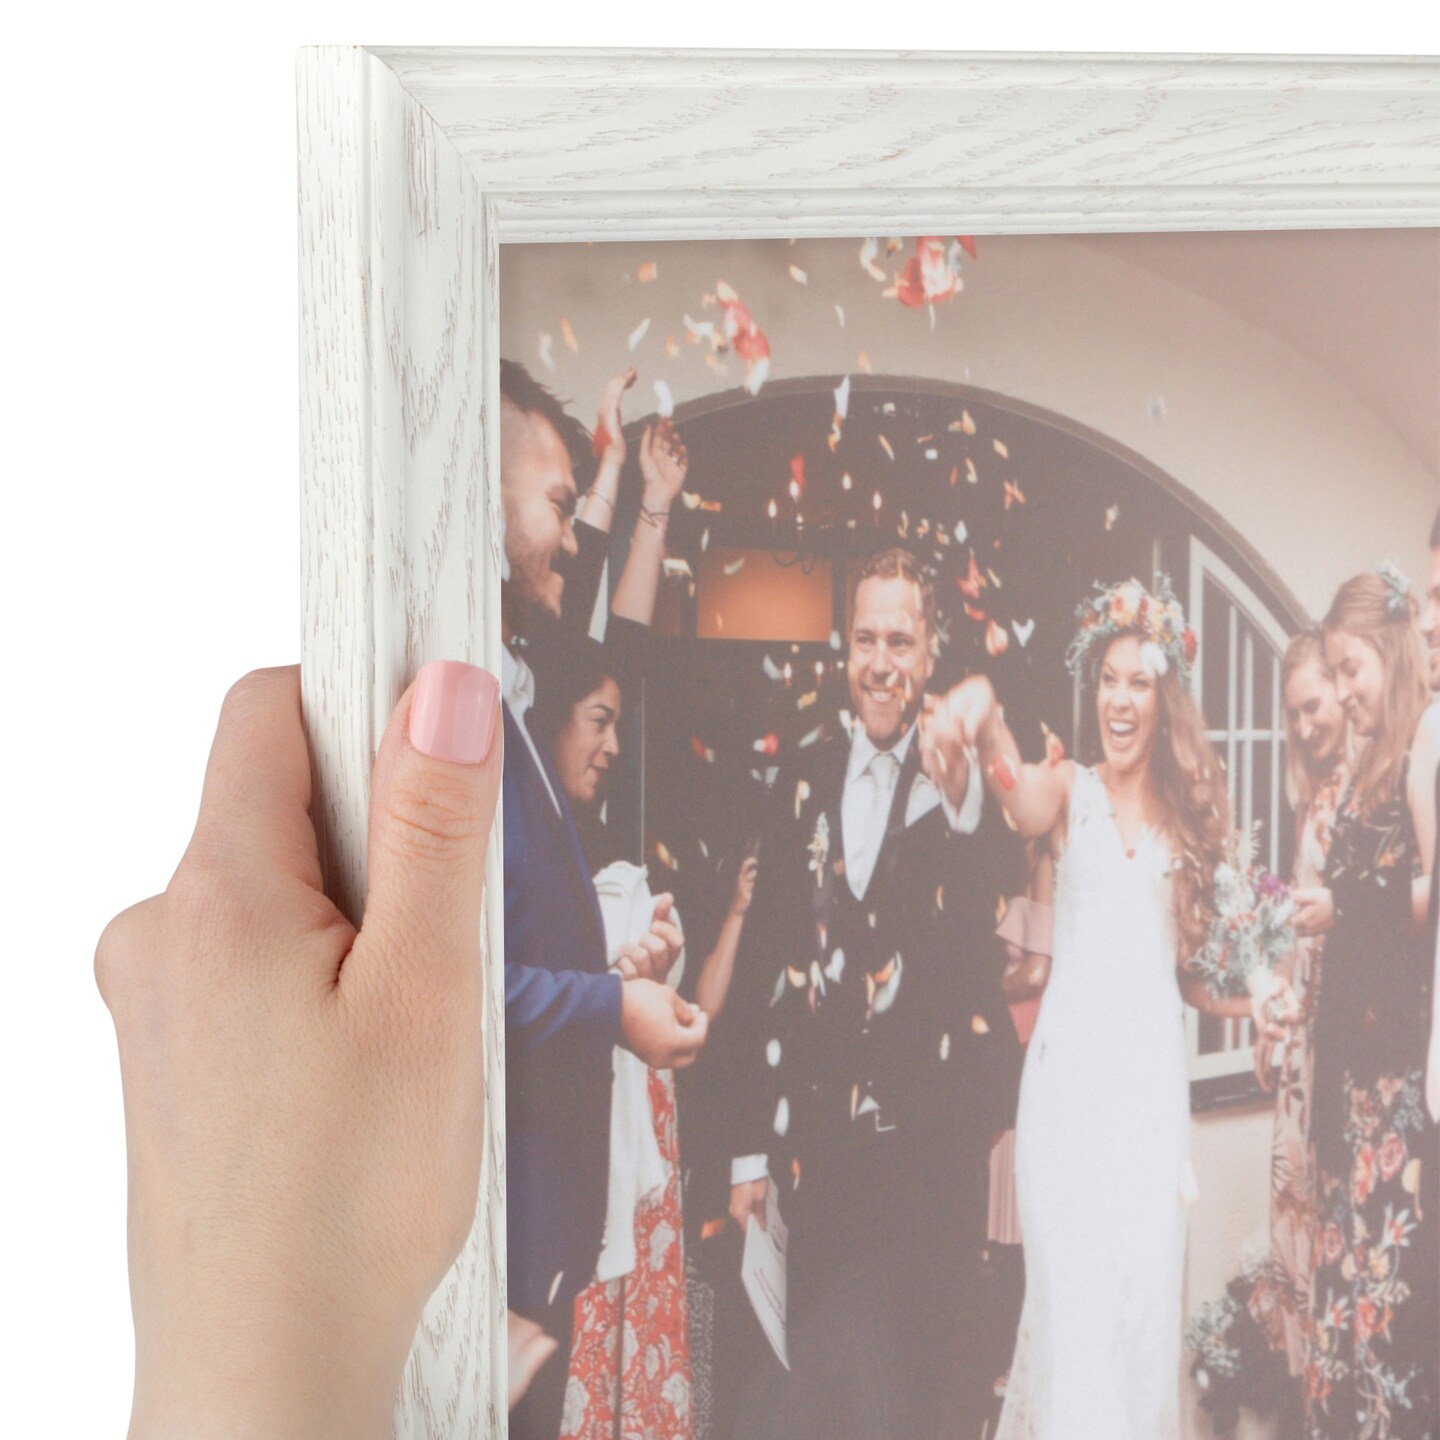 ArtToFrames 18x36 Inch  Picture Frame, This 1.25 Inch Custom Wood Poster Frame is Available in Multiple Colors, Great for Your Art or Photos - Comes with 060 Plexi Glass and  Corrugated Backing (A8NZ)